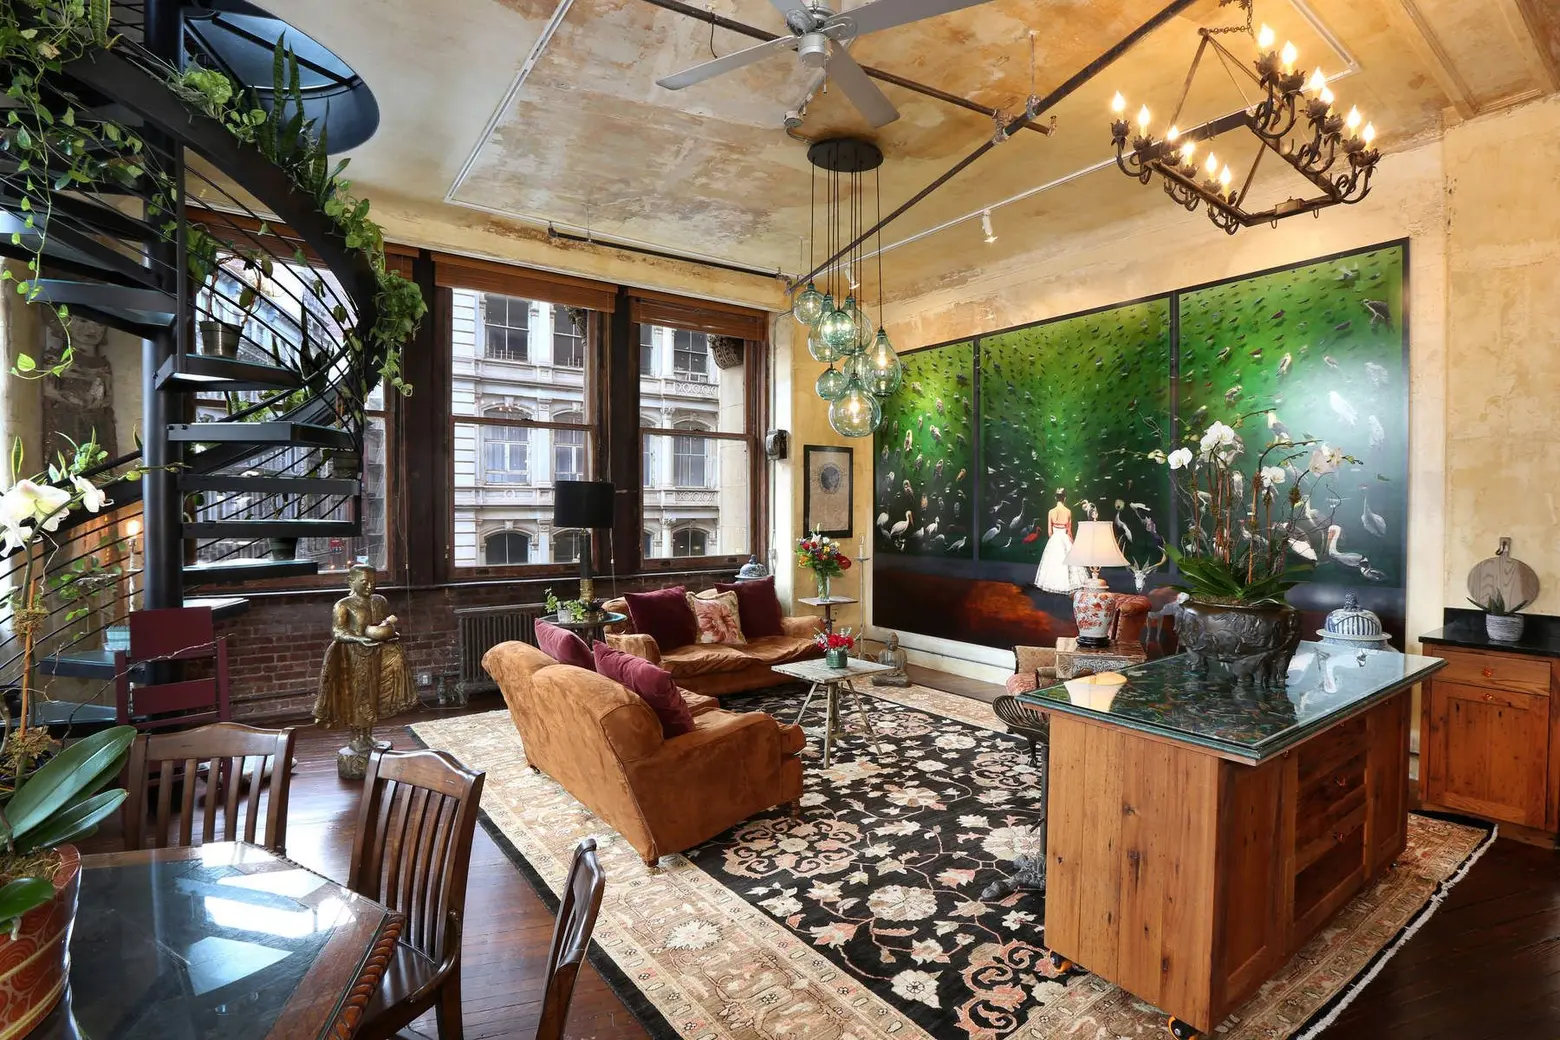 $6.25M Flatiron loft’s bohemian-luxe style reflects its owner’s international flair